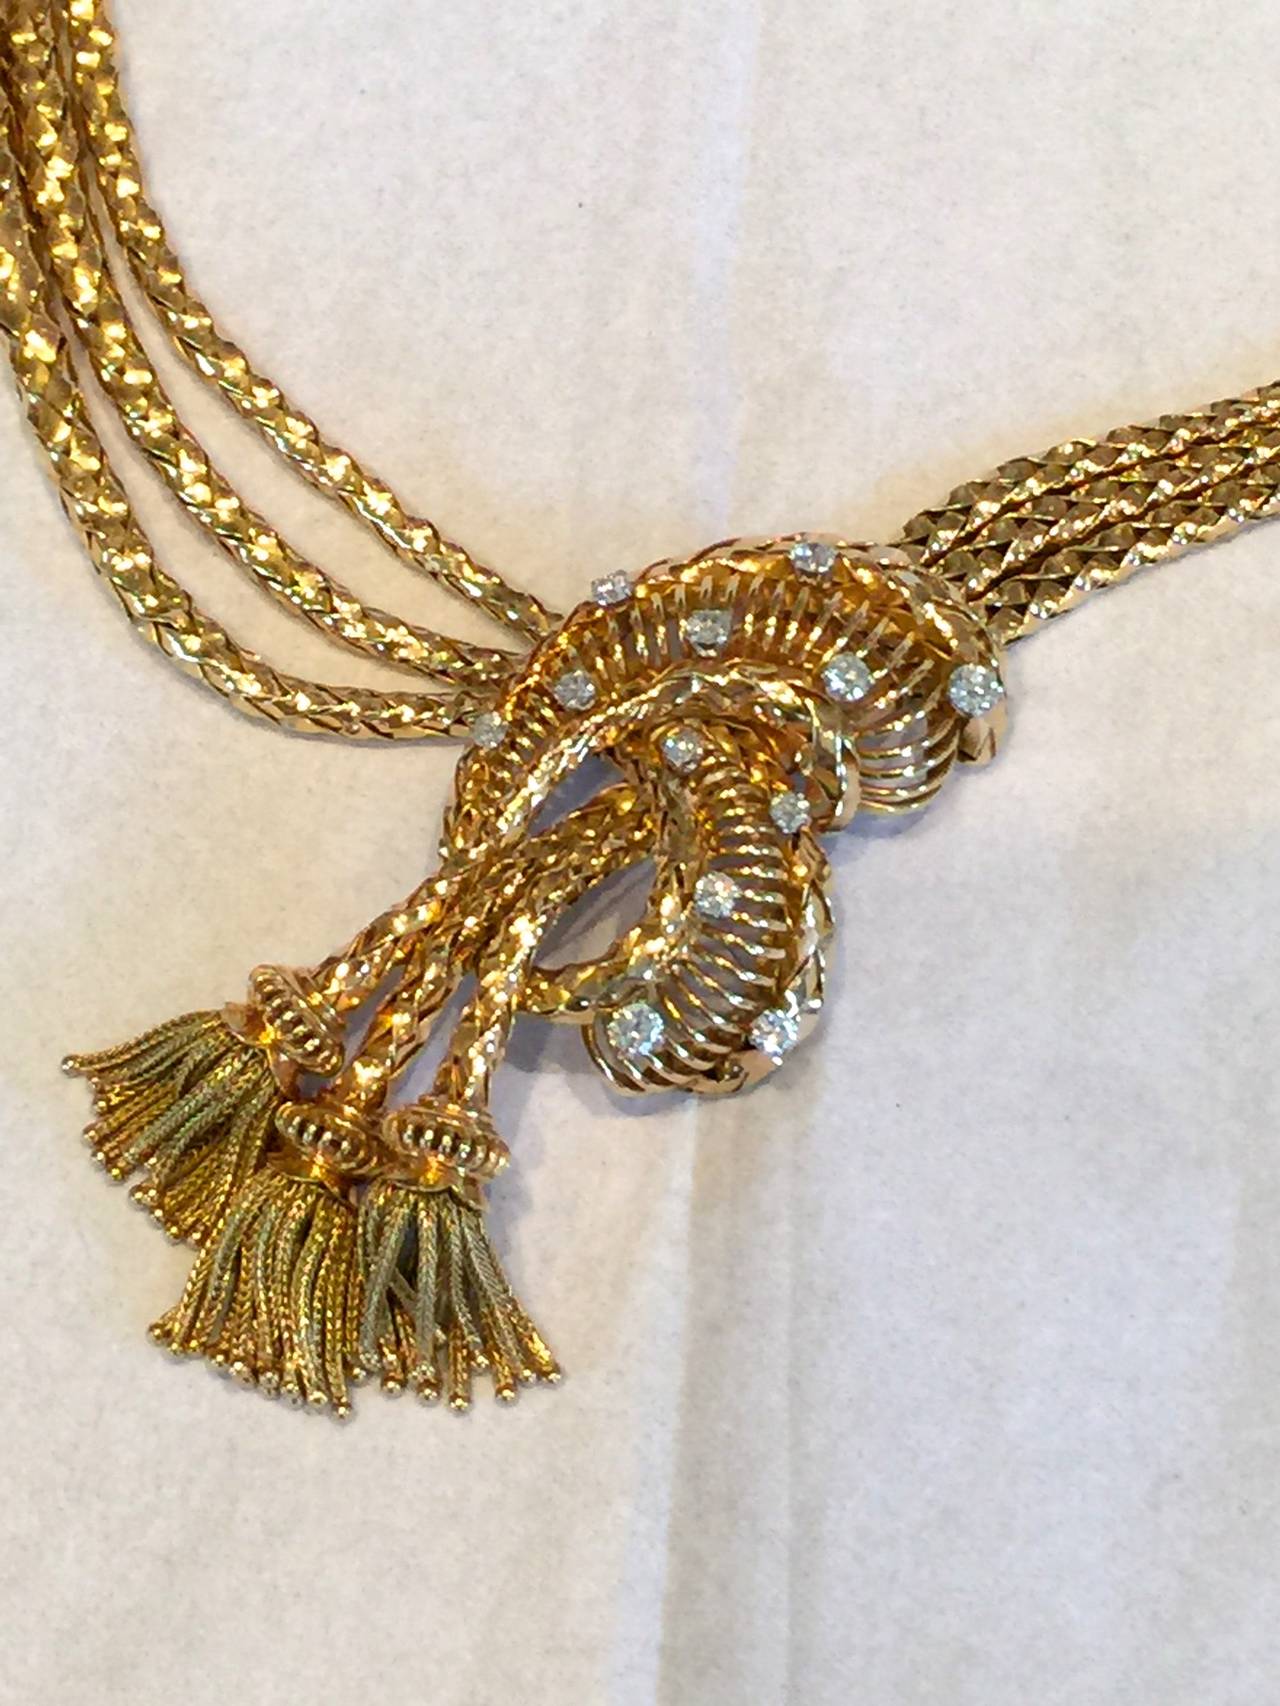 Fabulous retro necklace circa.1945. The necklace is 18k yellow gold and has approximately 1.50cts in diamonds on top of a wonderful open gold knot with three decorative tassels. The necklace is 15